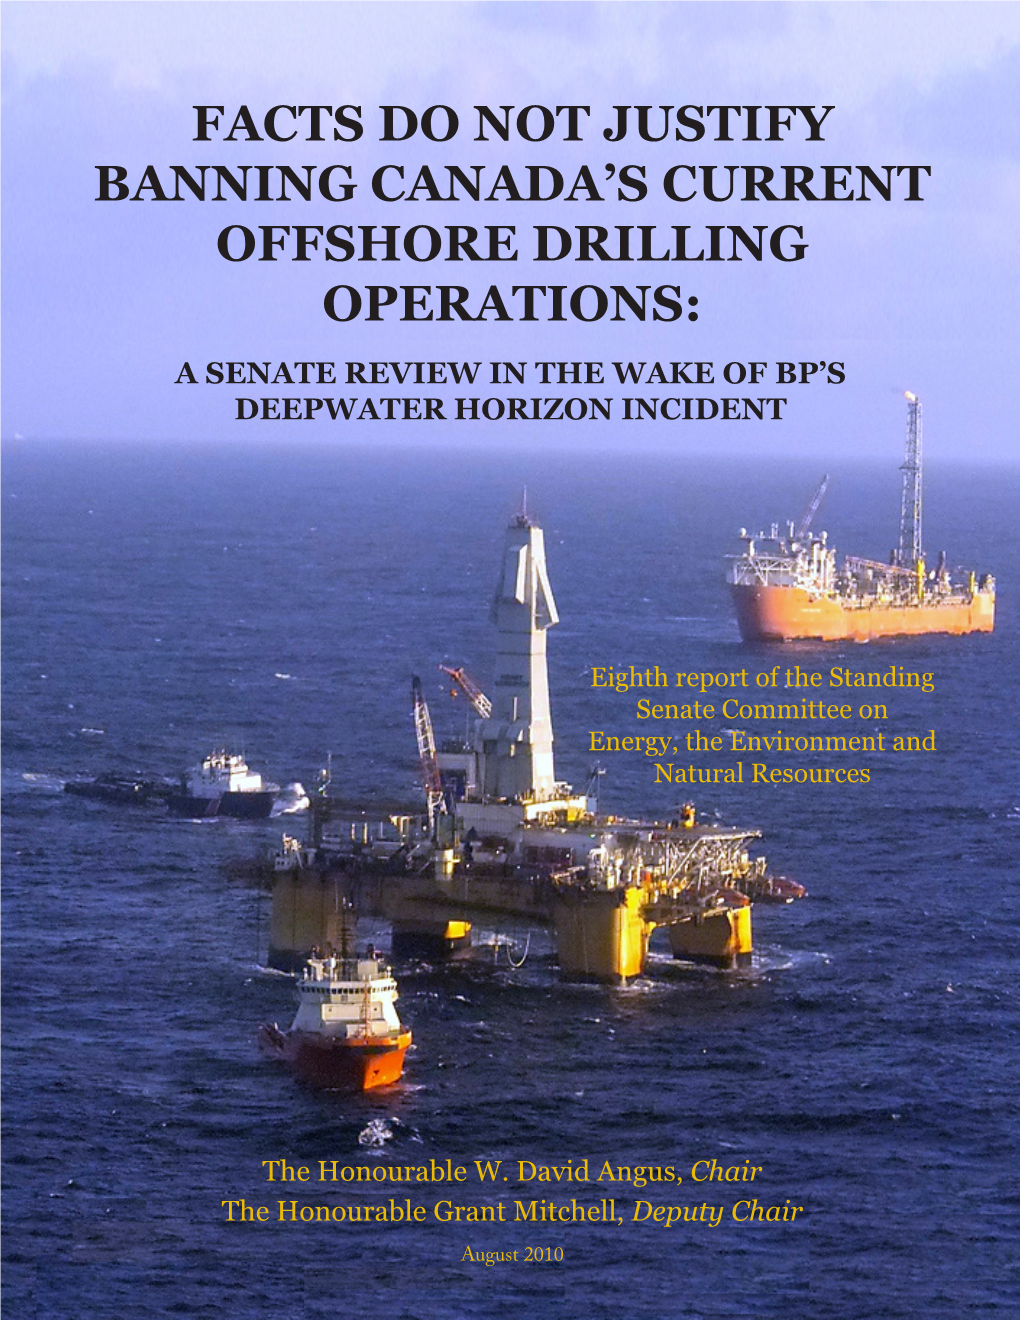 Facts Do Not Justify Banning Canada's Current Offshore Drilling Operations